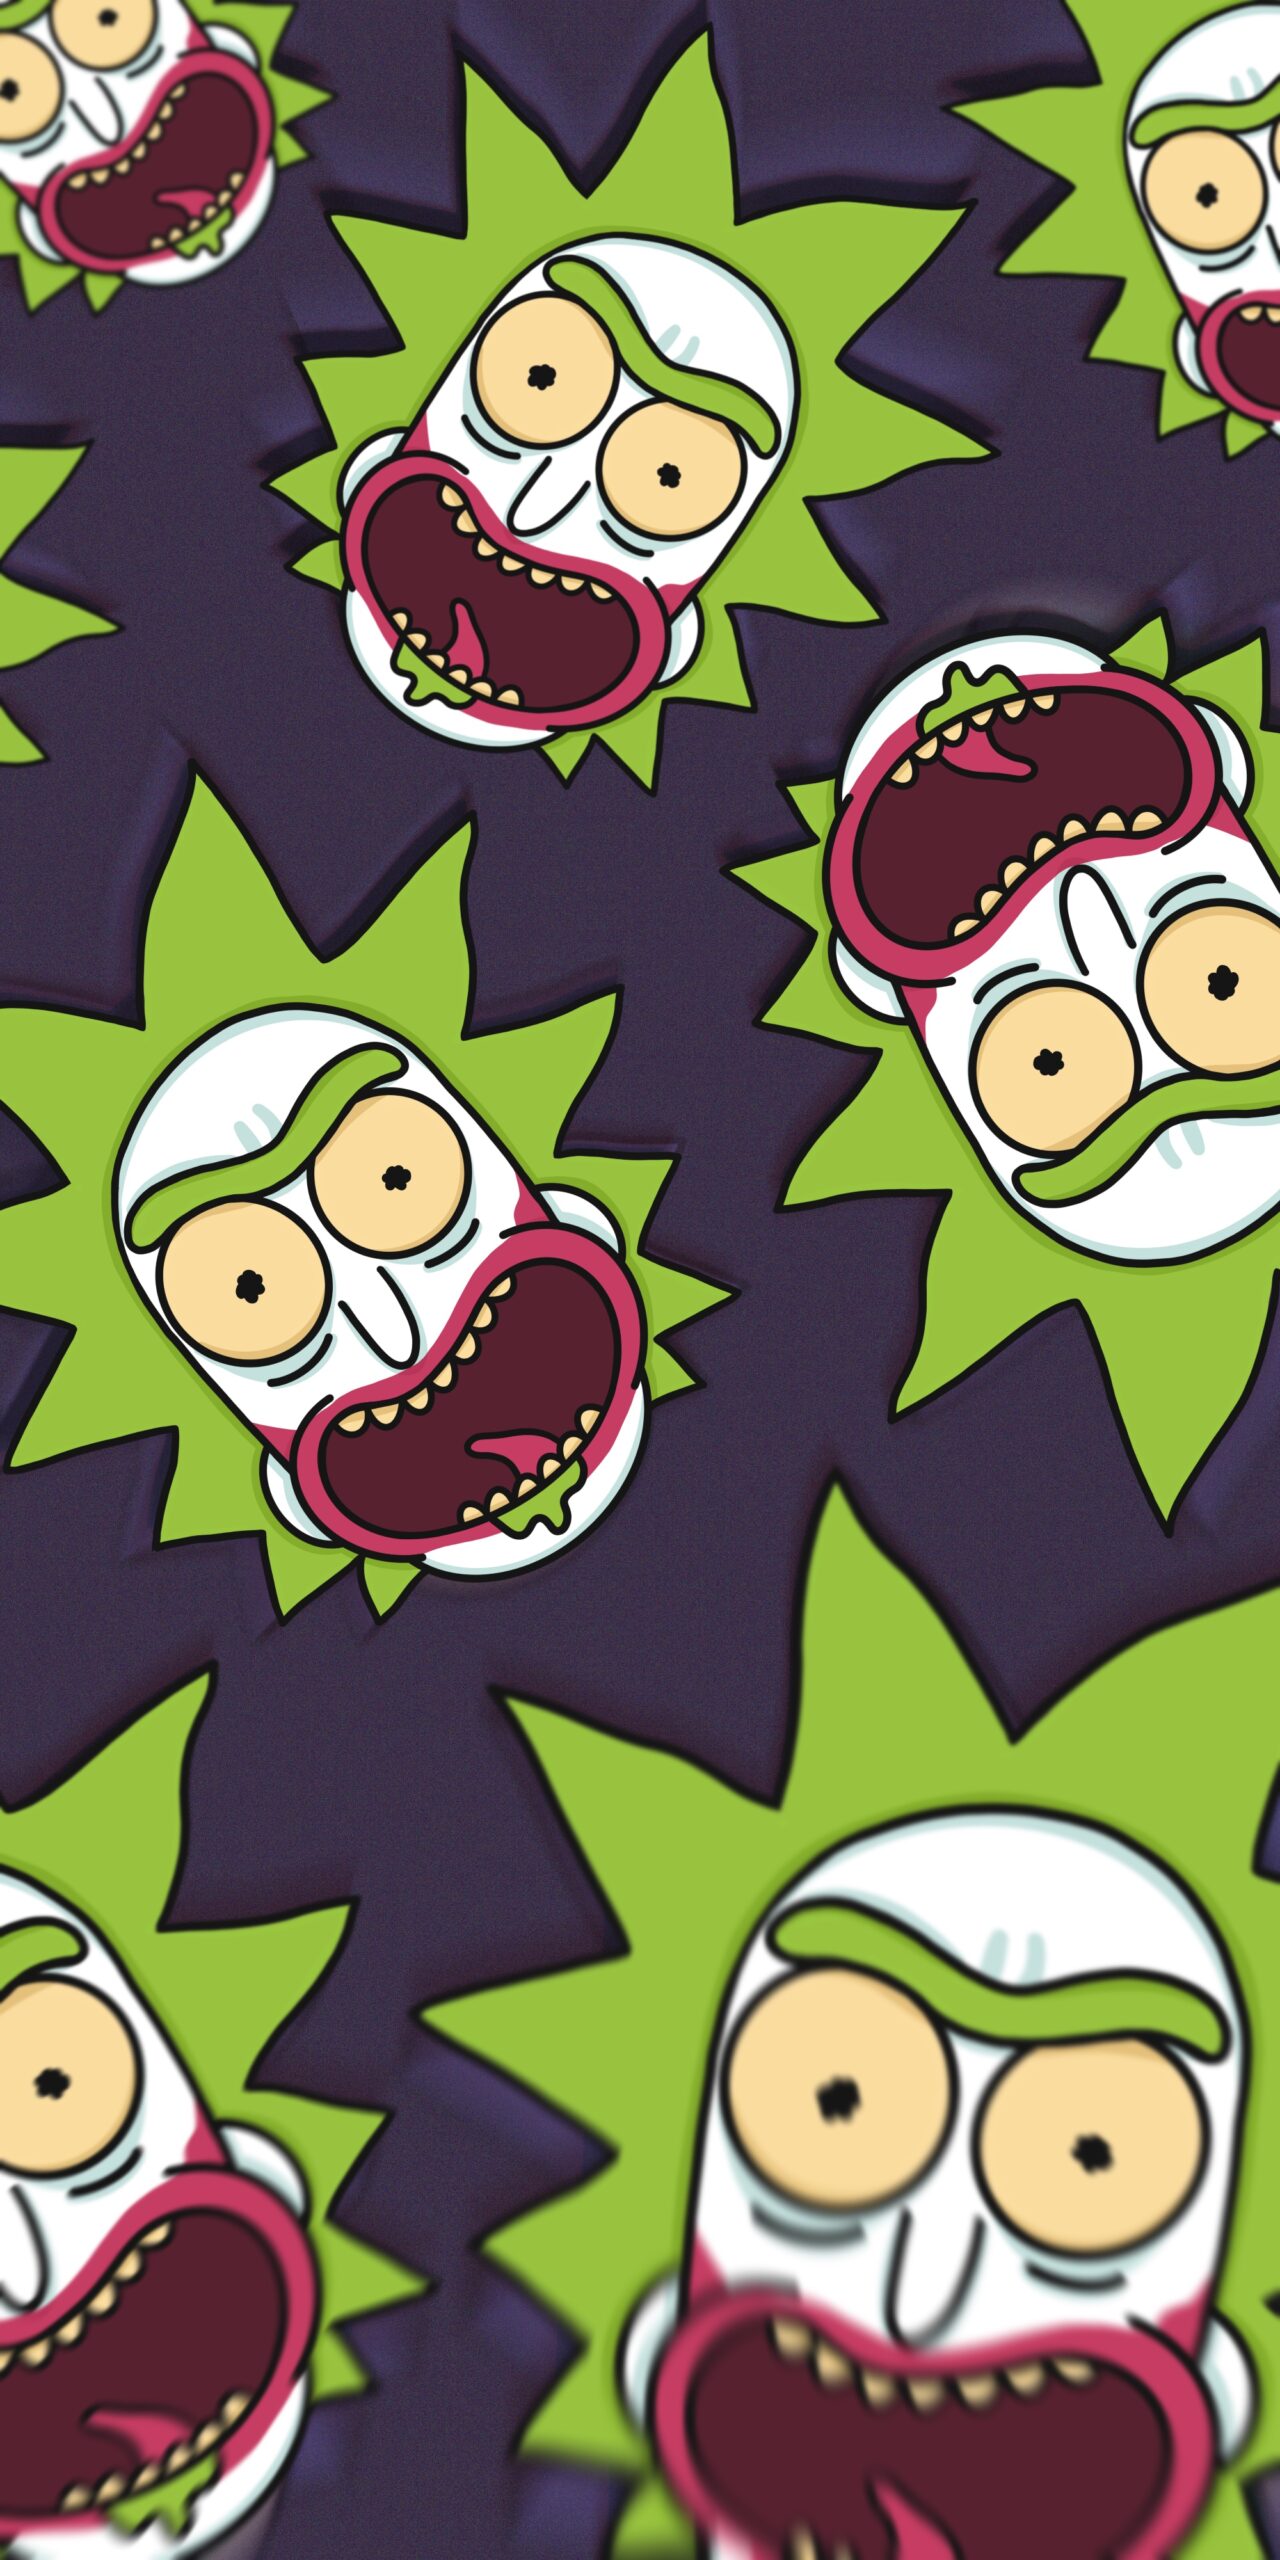 Rick Sanchez Joker - Rick and Morty Phone Wallpaper - Why so schwifty?